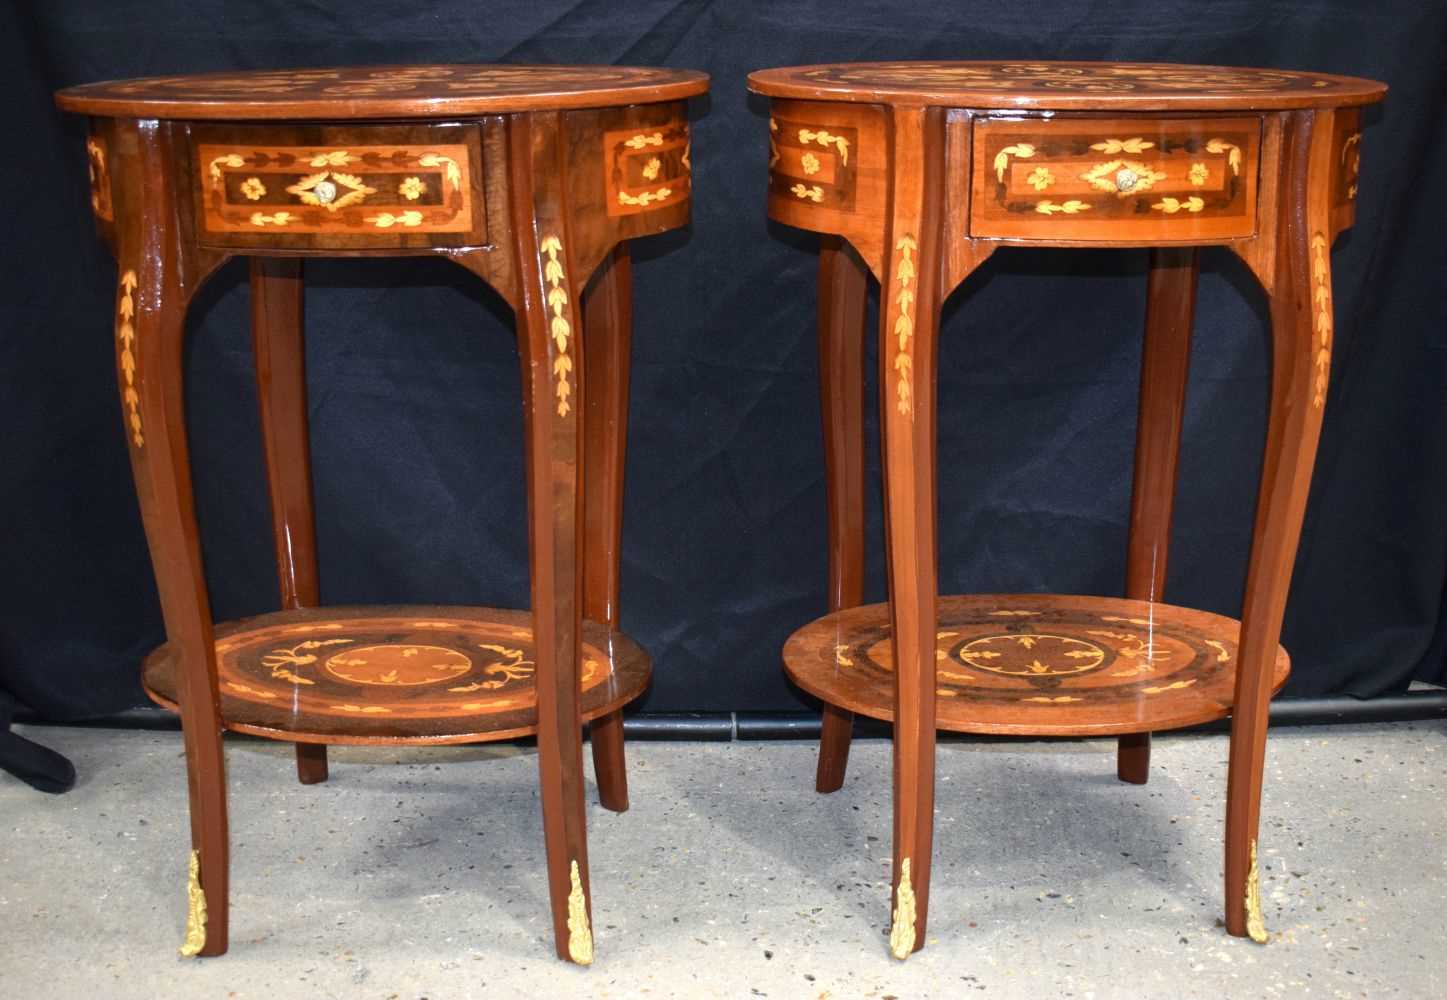 A near pair of Baroque style inlaid Oval side 1 drawer tables 73 x 53 x 40 cm (2) - Image 2 of 8